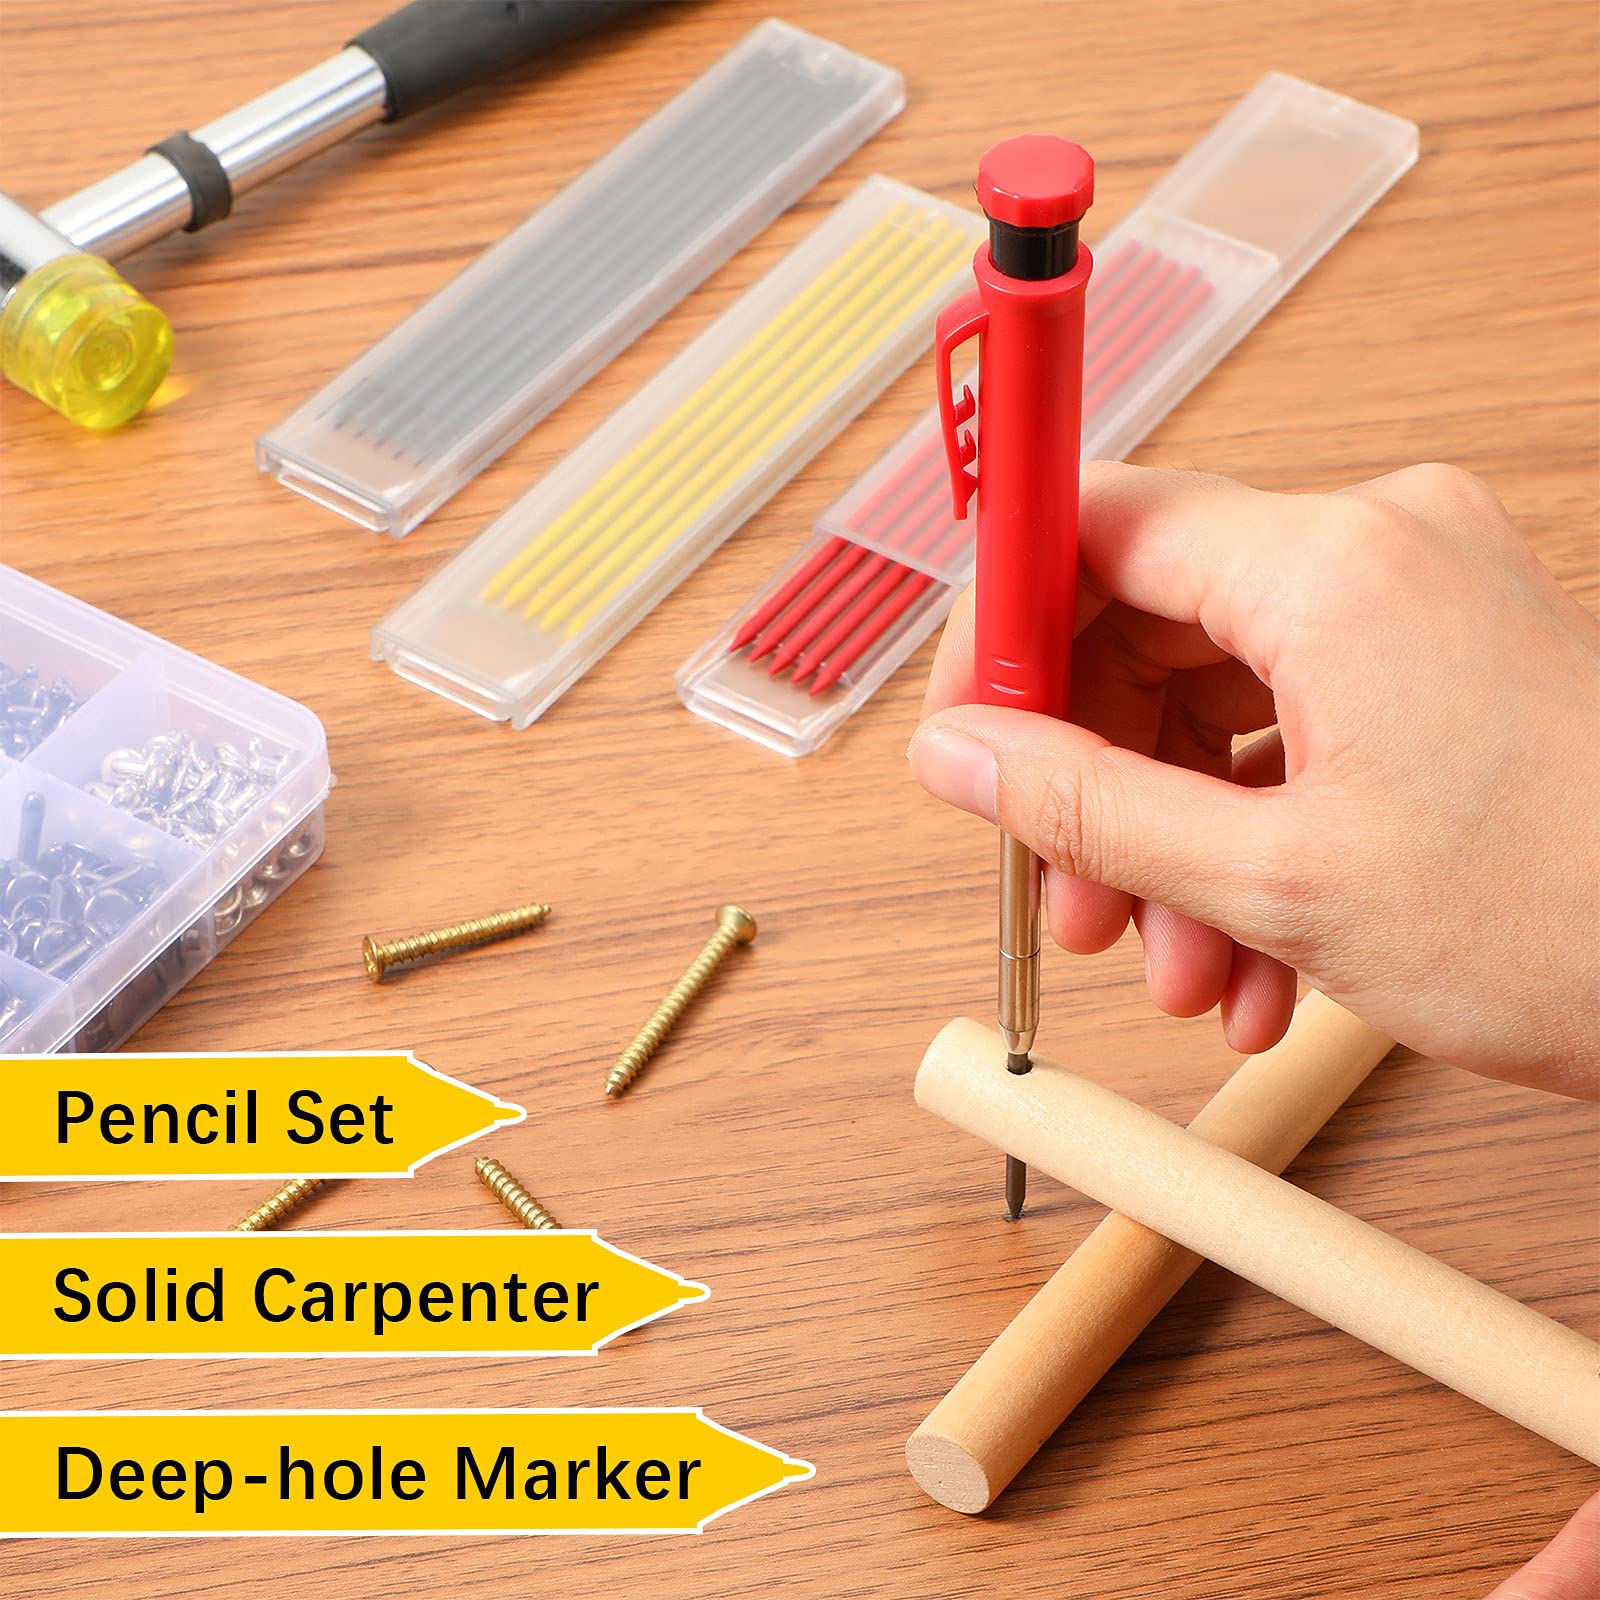 Outus Solid Carpenter Pencil for Construction and Refills with Built in Sharpener, Long Nosed Deep Hole Mechanical Pencil Marker Marking Tool for Scriber Woodworking Architect Carpenter (39 Pieces)